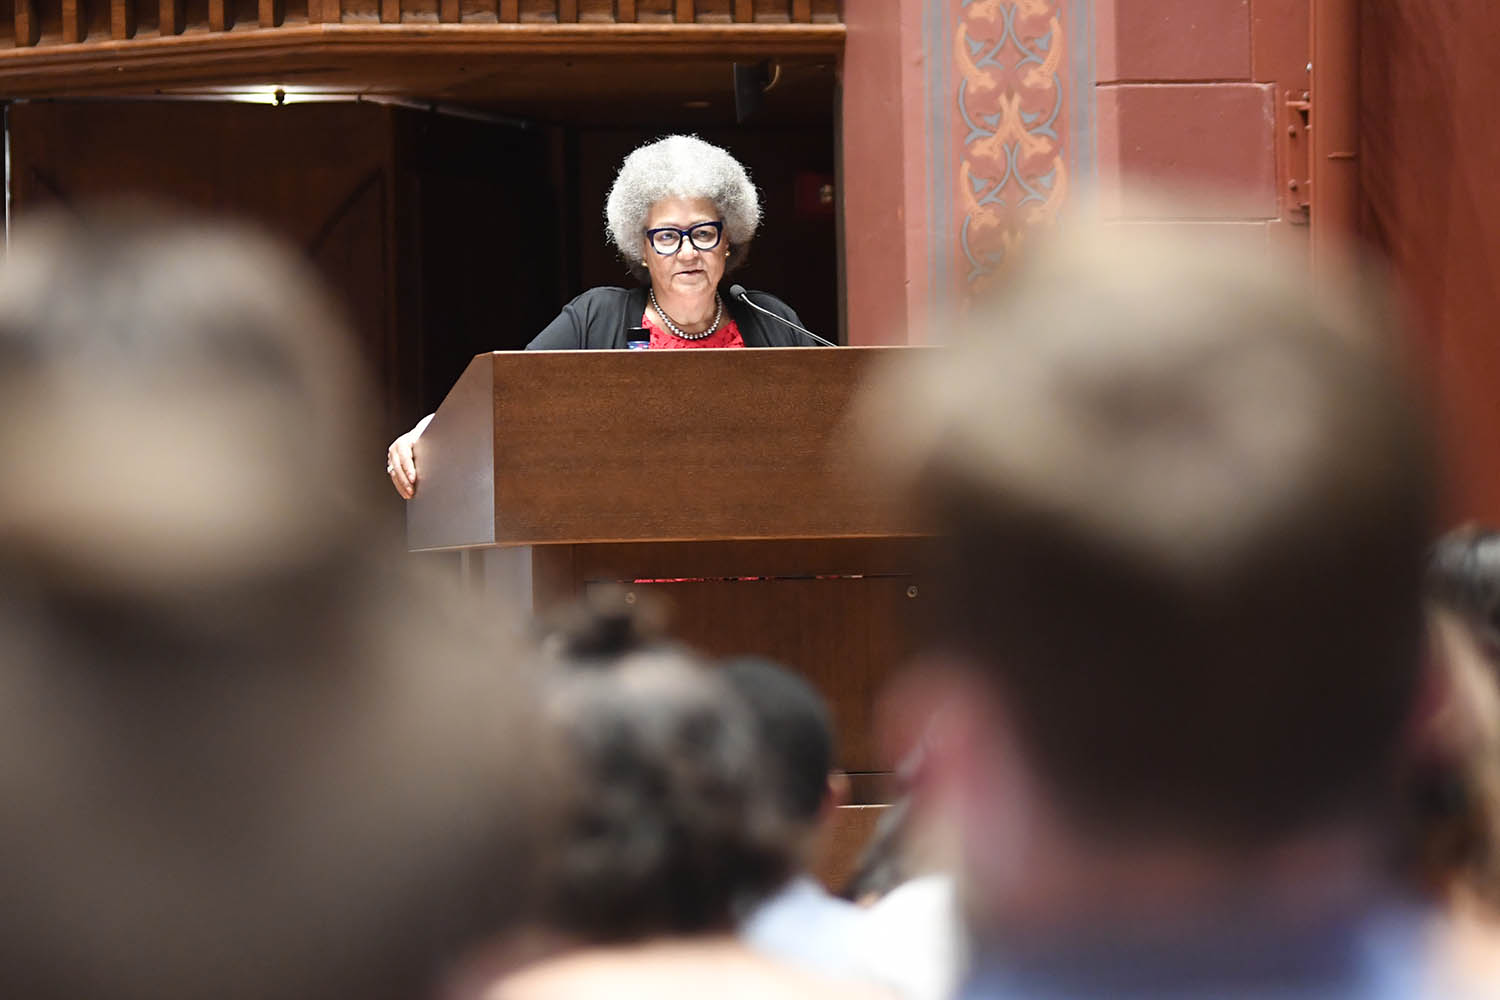 Dr. Andrea Grubb Barthwell '76, founder of Encounter Medical Group, gave the keynote address at the Phi Beta Kappa initiation ceremony on May 21.